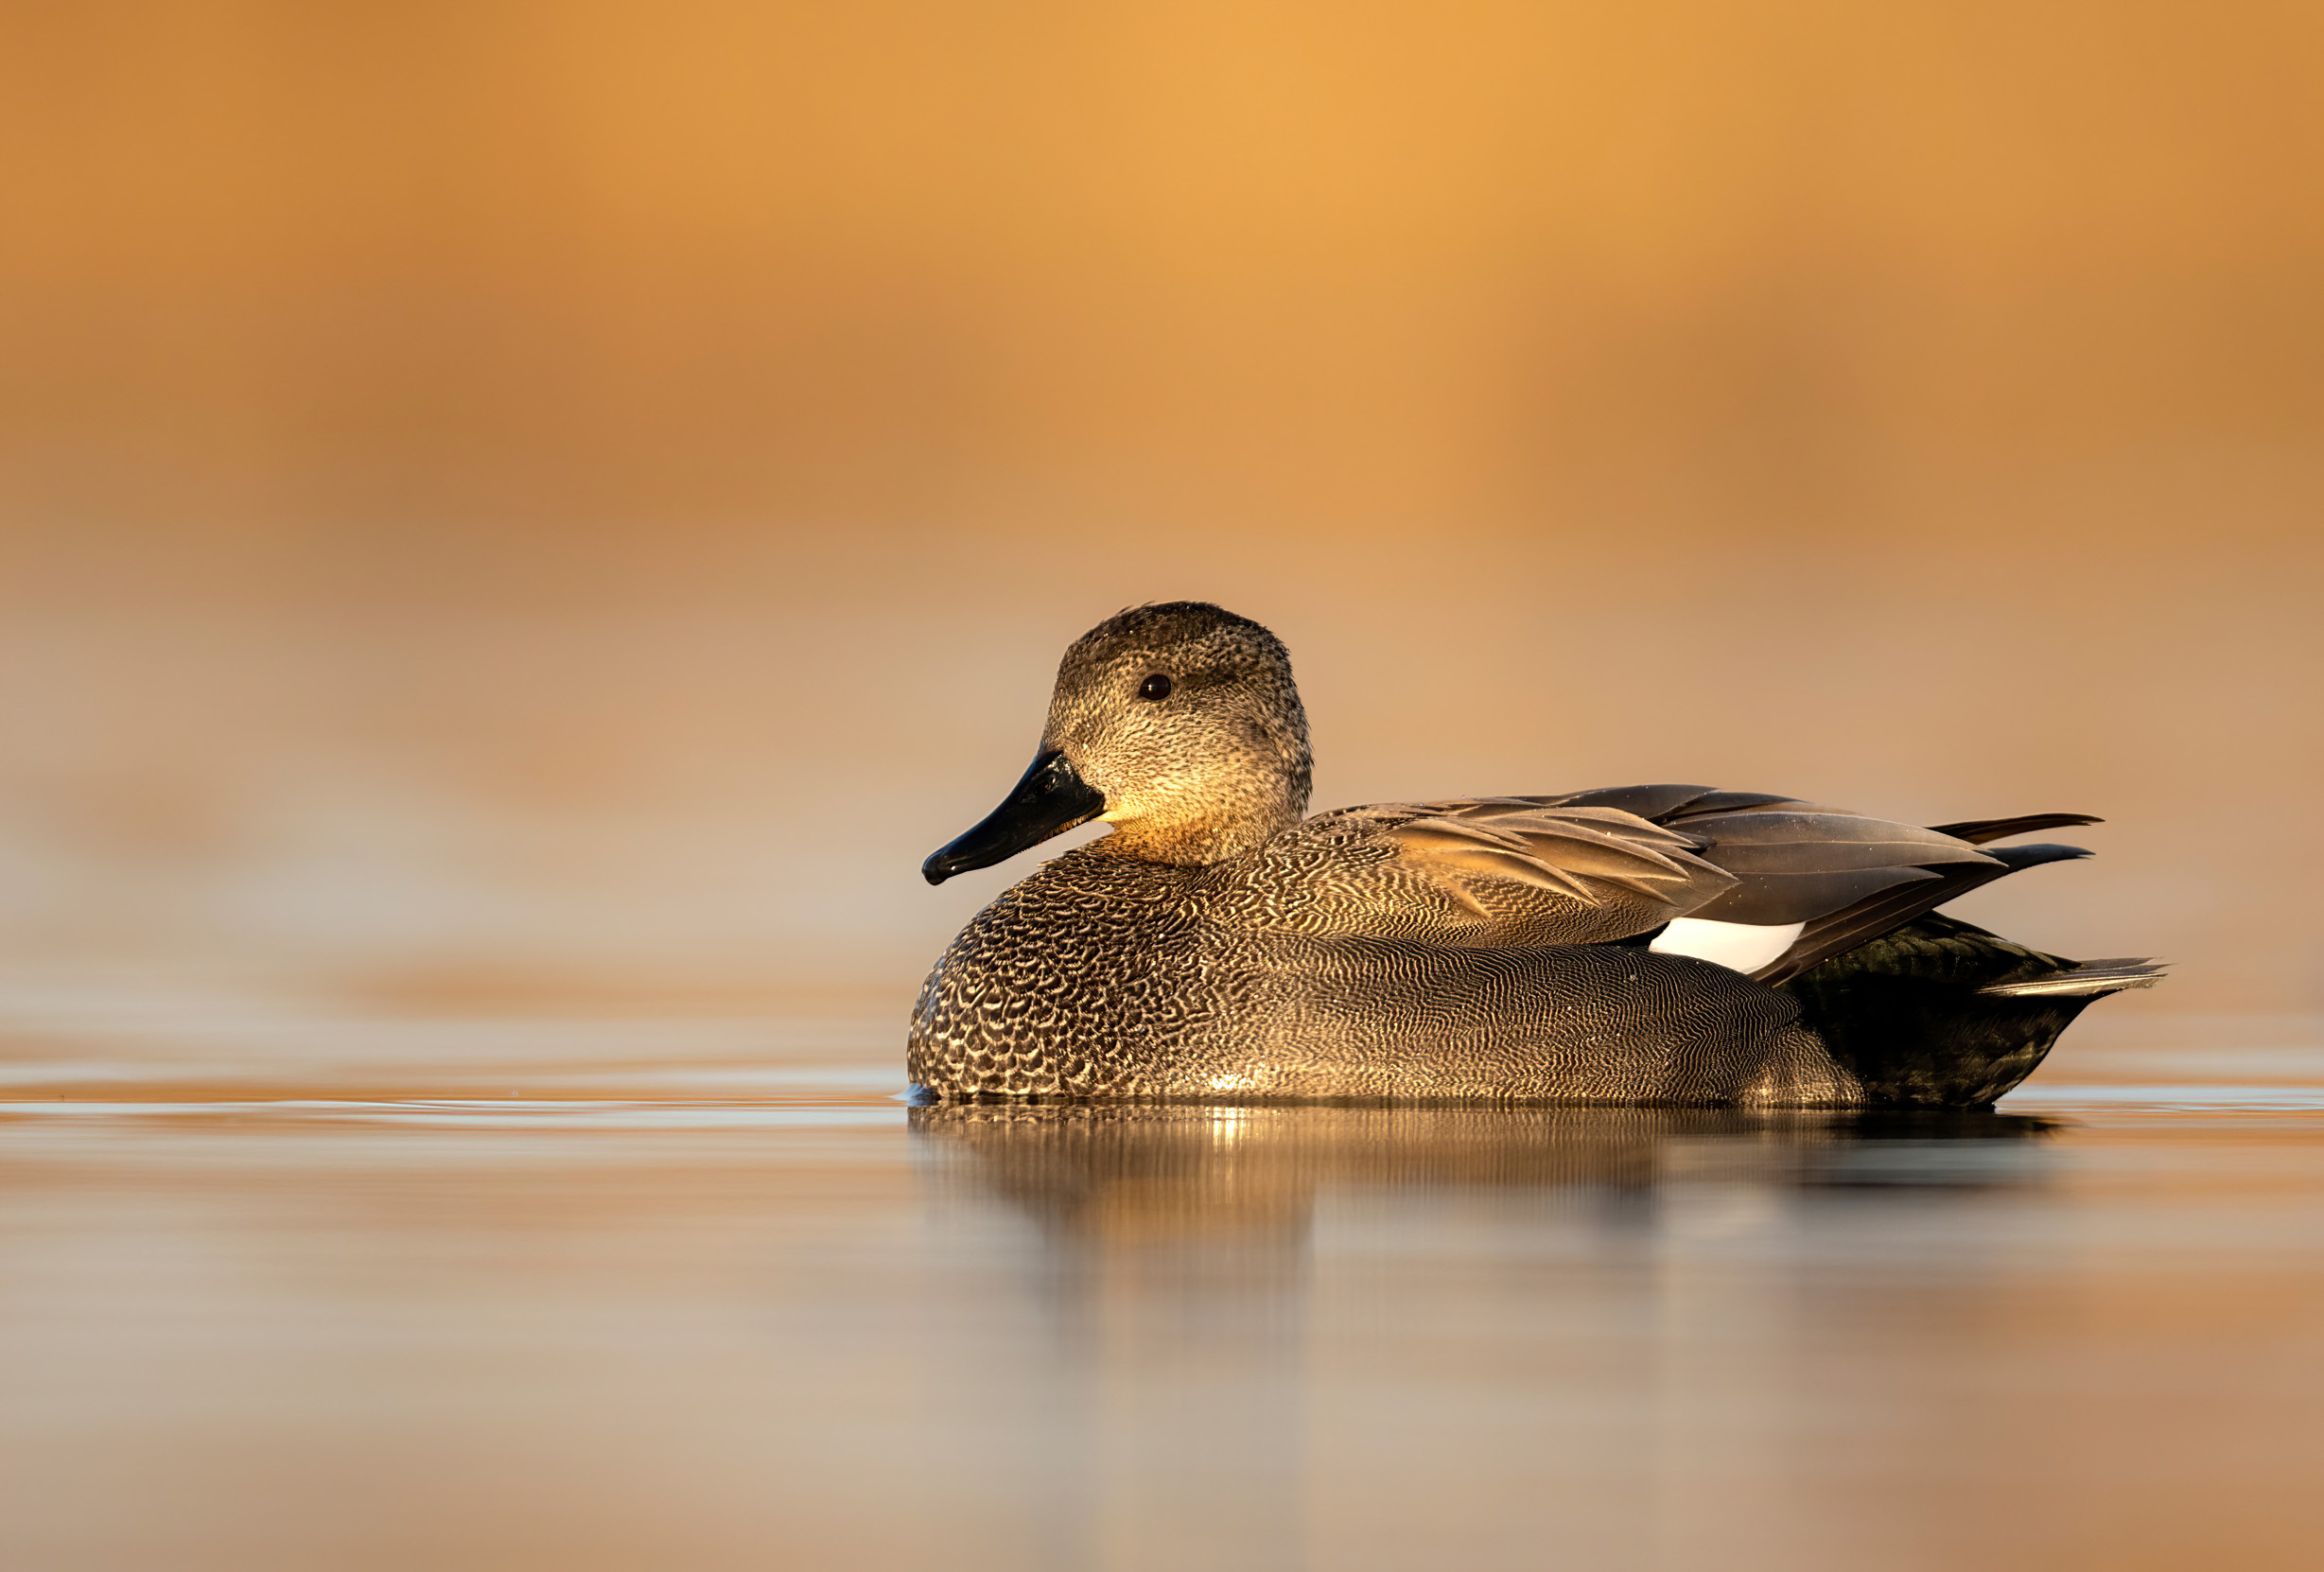 A close-up of a male Gadwall sat on water at sunset.